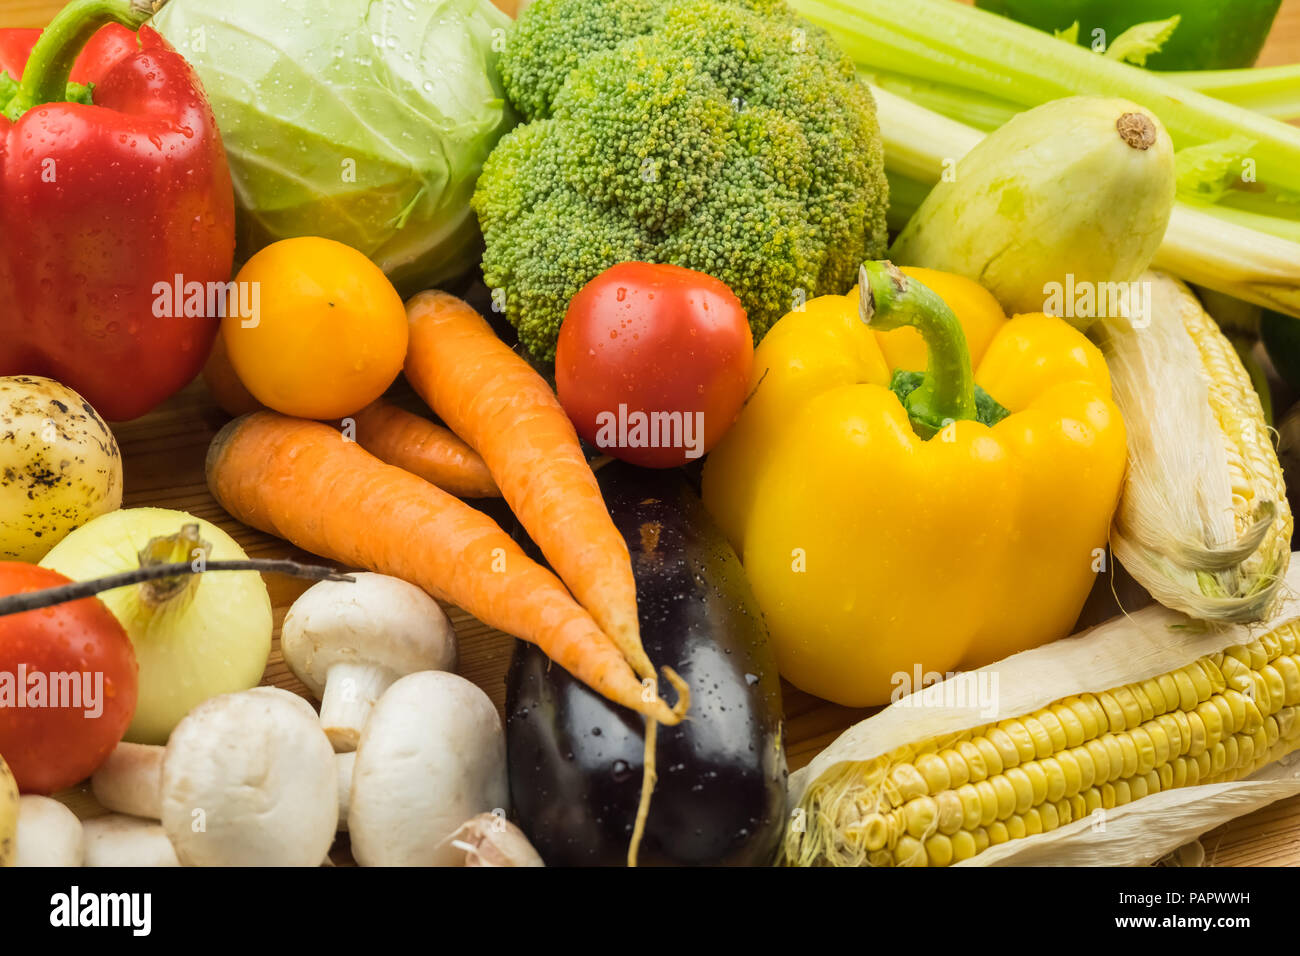 Close-up top view image of fresh organic vegetables. Locally grown bell pepper, corn, carrot, mushrooms and other natural vegan food laying on table. Stock Photo